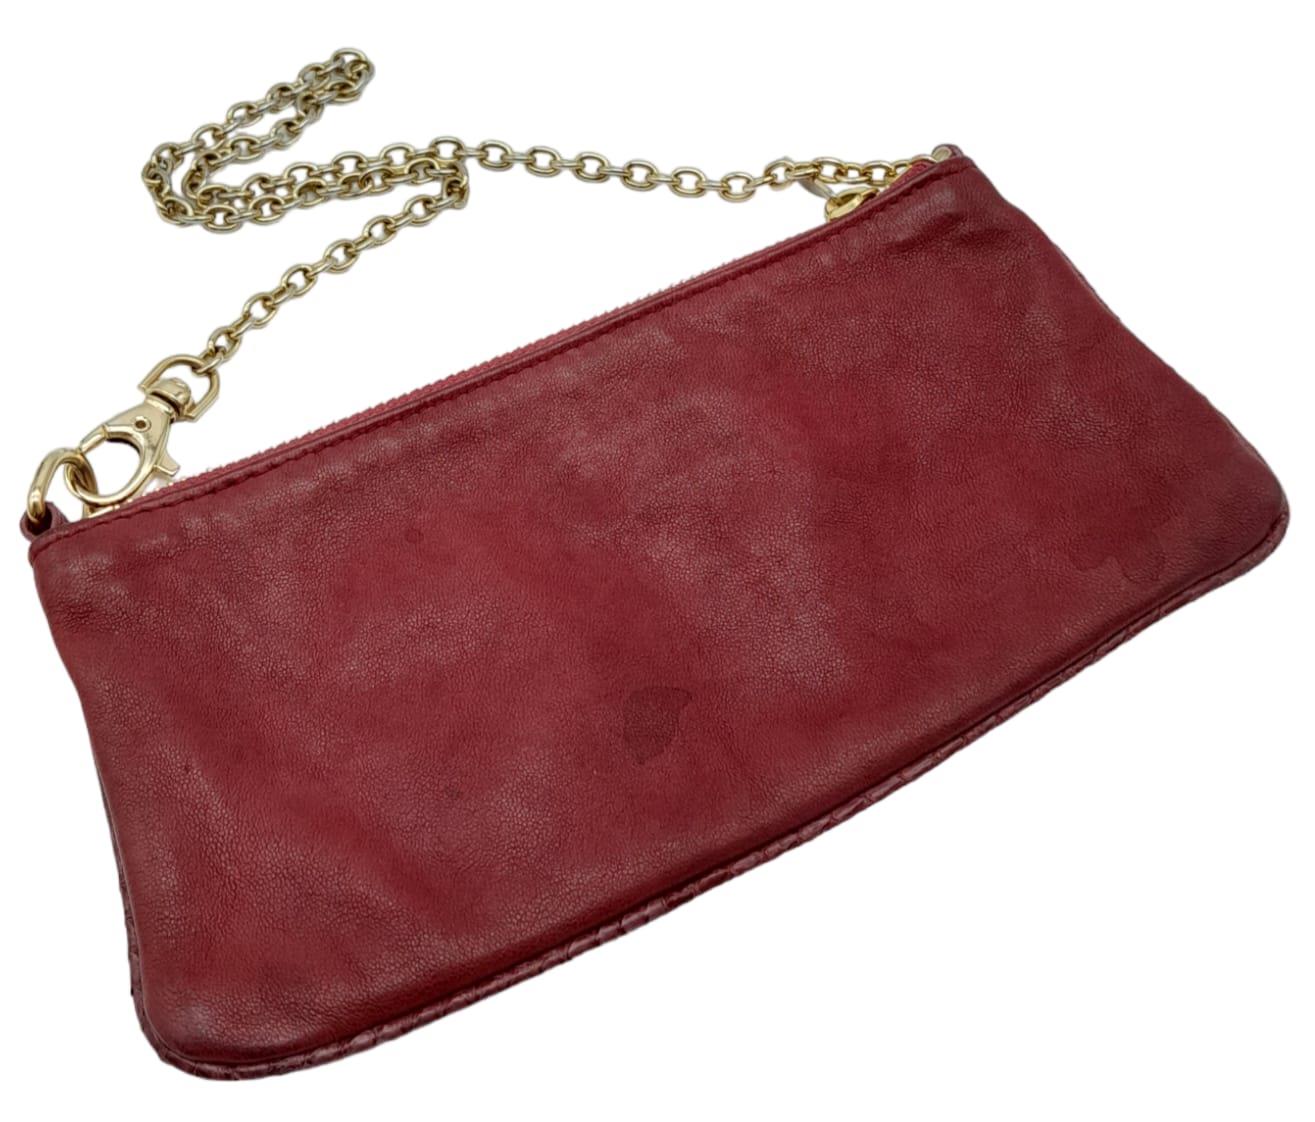 A Jimmy Choo Magenta Bag. Leather exterior with gold-tone hardware and chain strap. Canvas interior, - Image 3 of 11